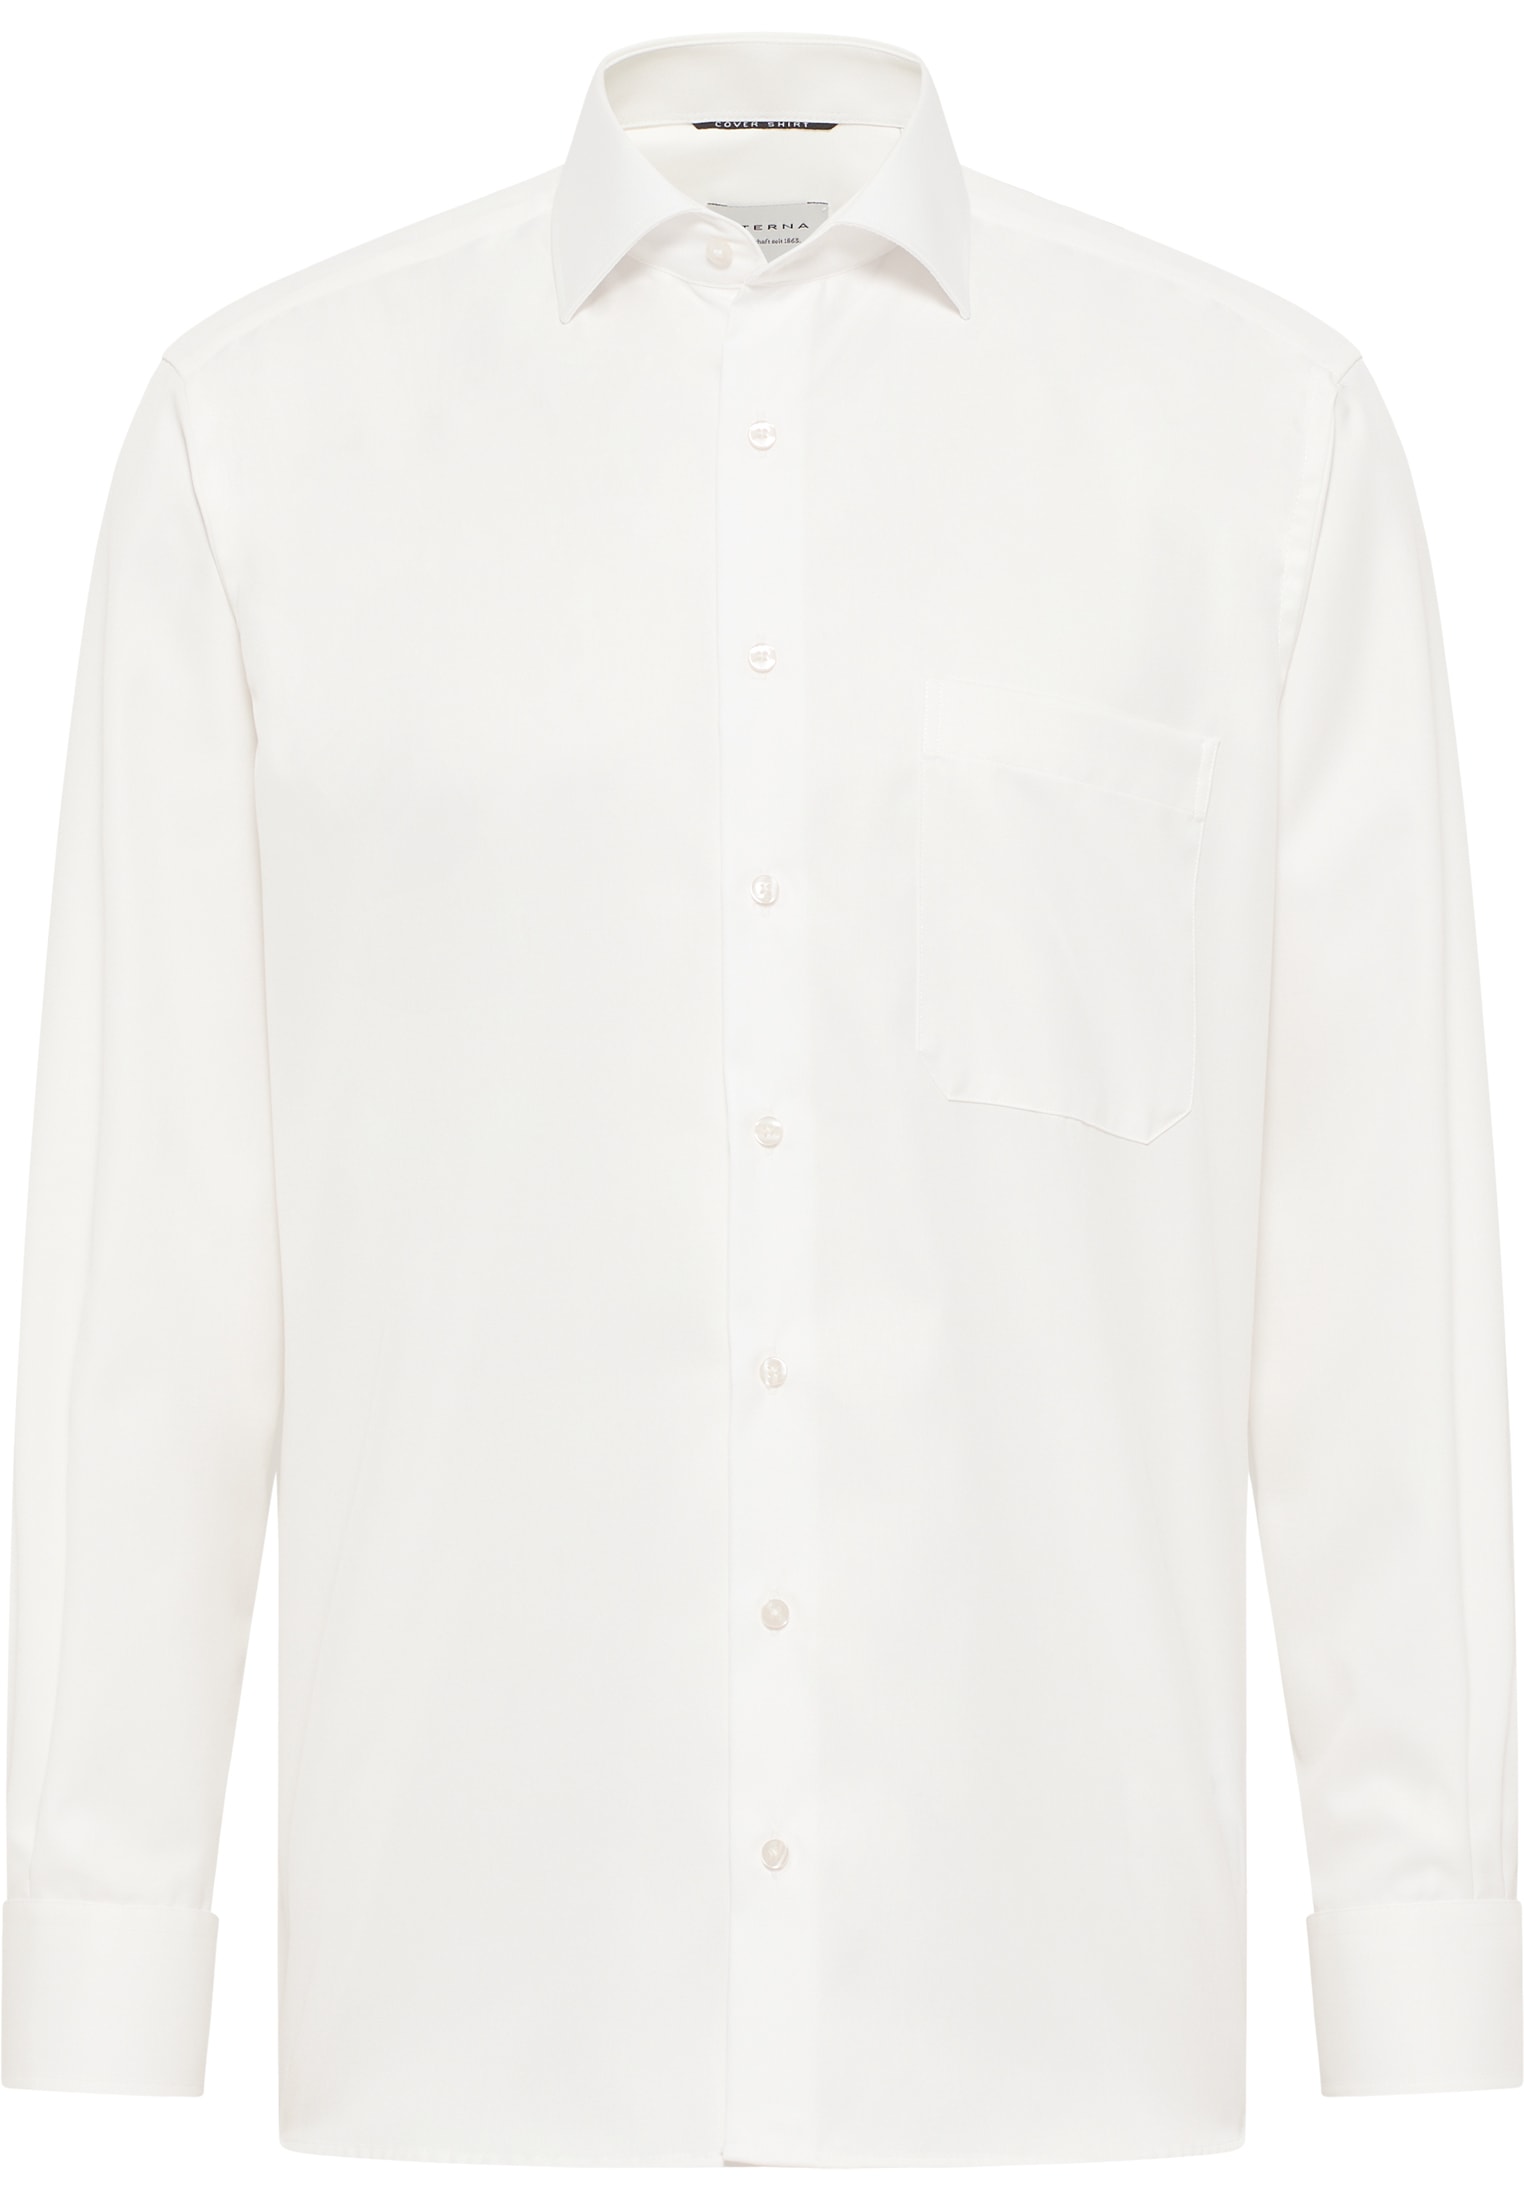 COMFORT FIT Cover Shirt in beige plain